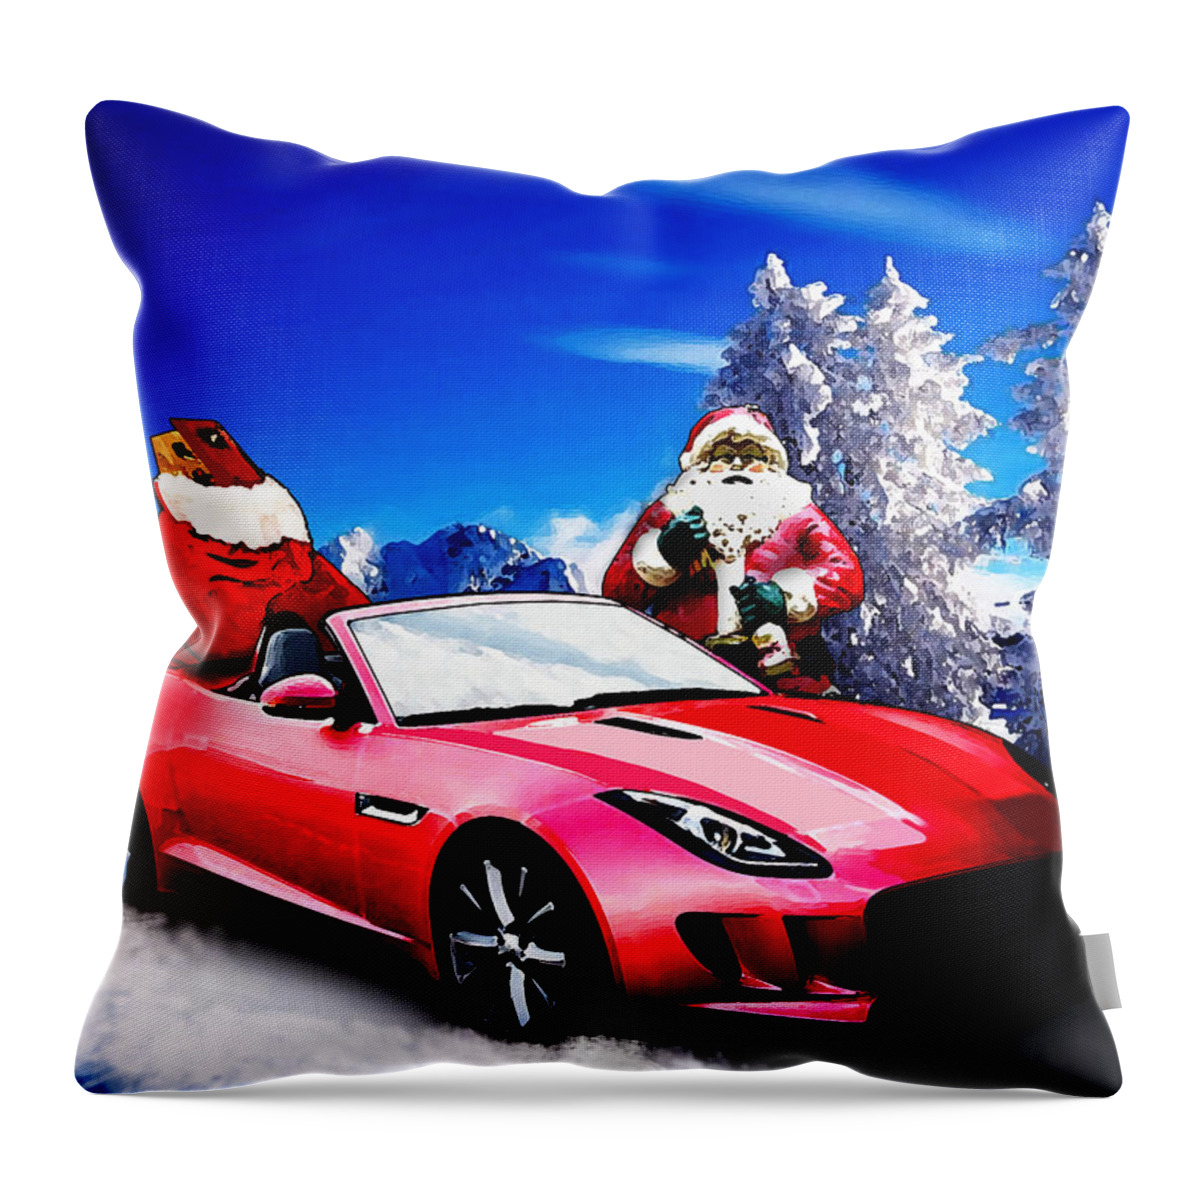 Merry Throw Pillow featuring the photograph Santas Secret Sleigh Revealed by Chas Sinklier